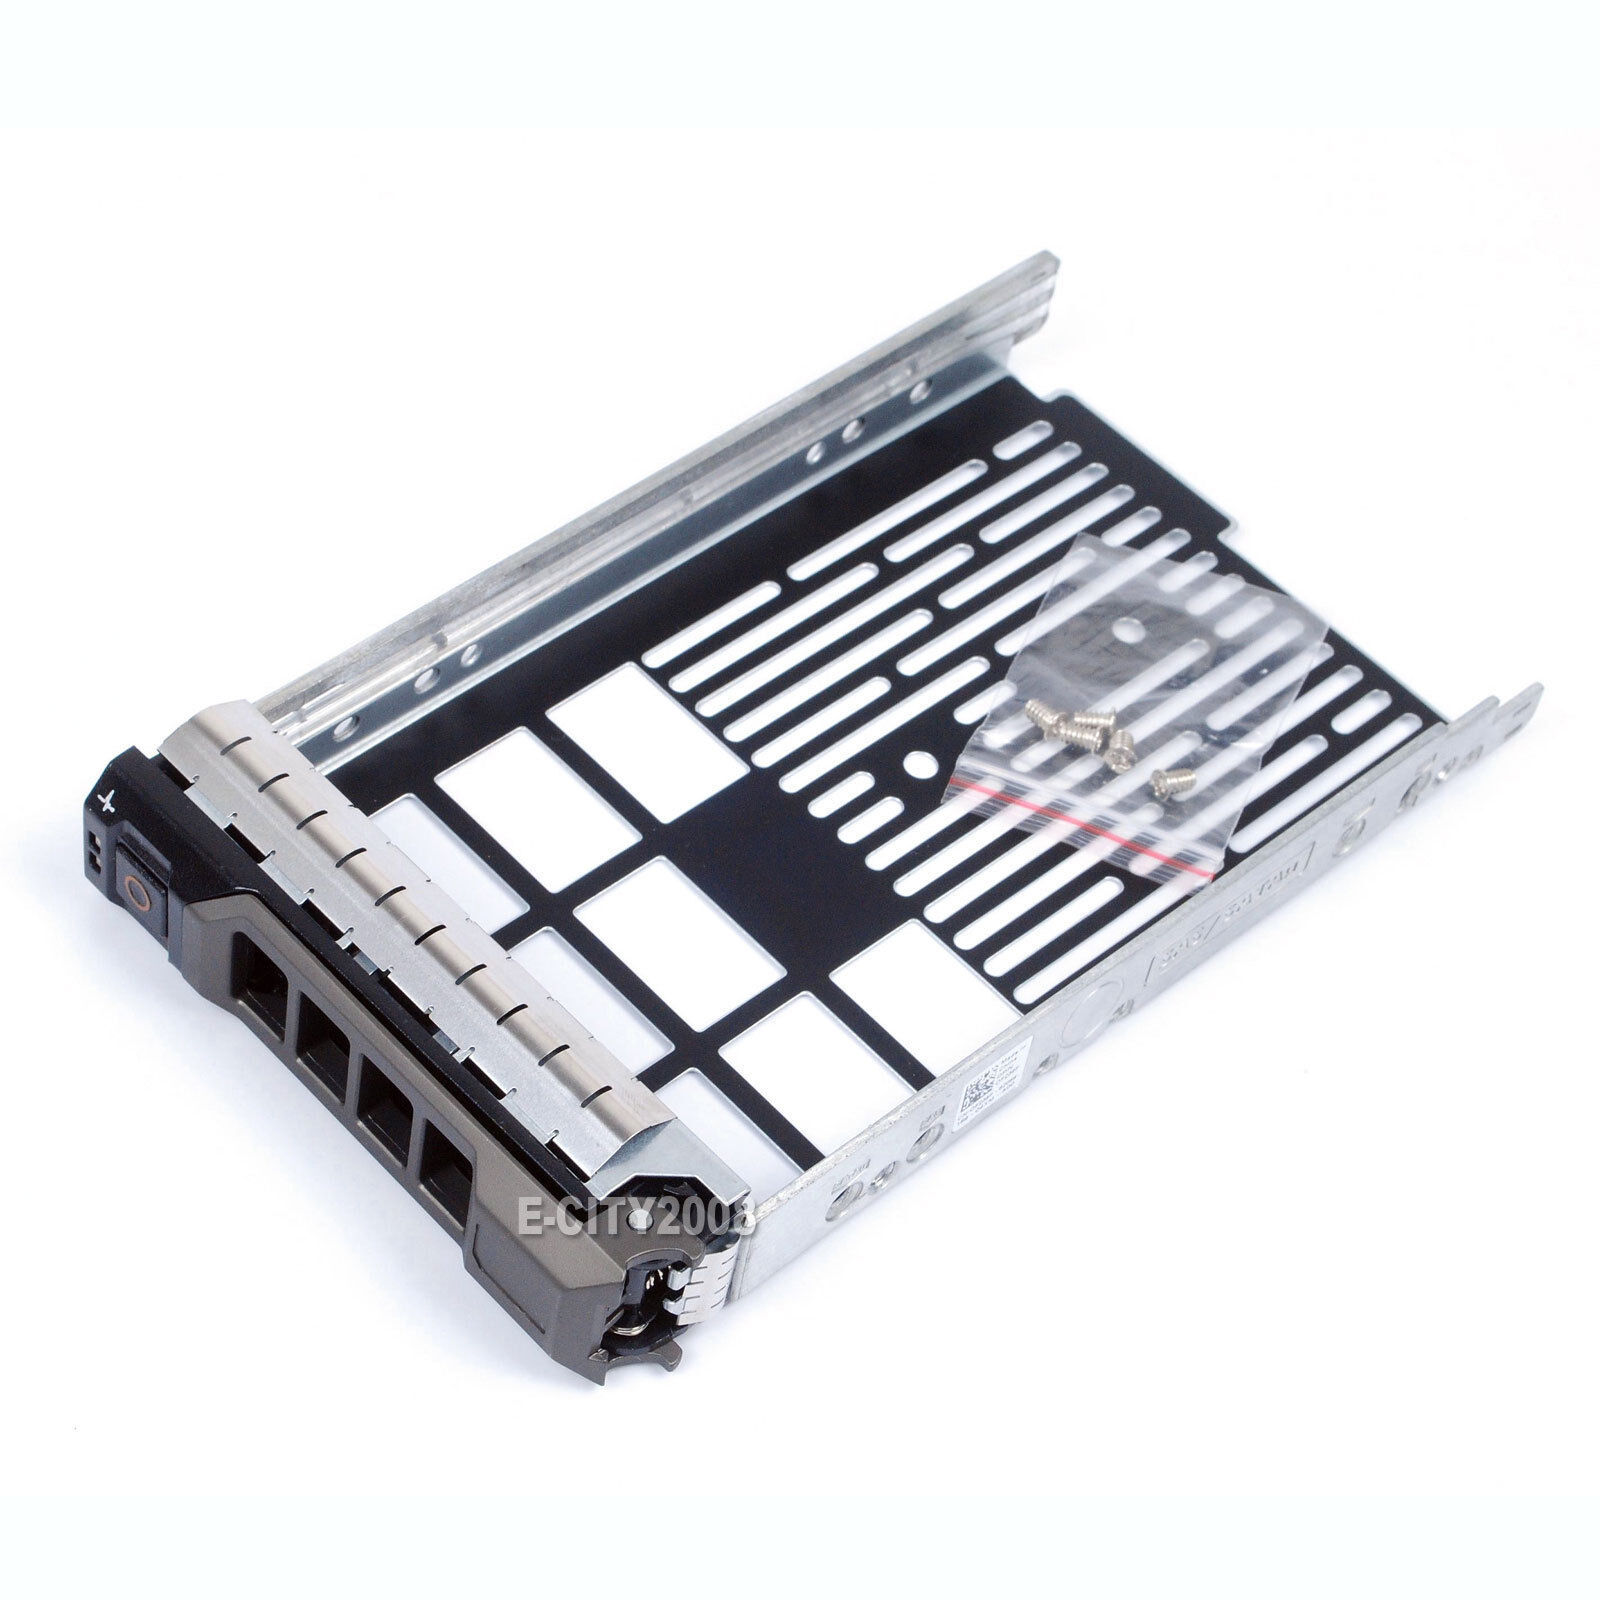 Primary image for 3.5" Tray Caddy For Dell R630 R730 R730XD T330 T430 T630 R310 R320 R410 R510